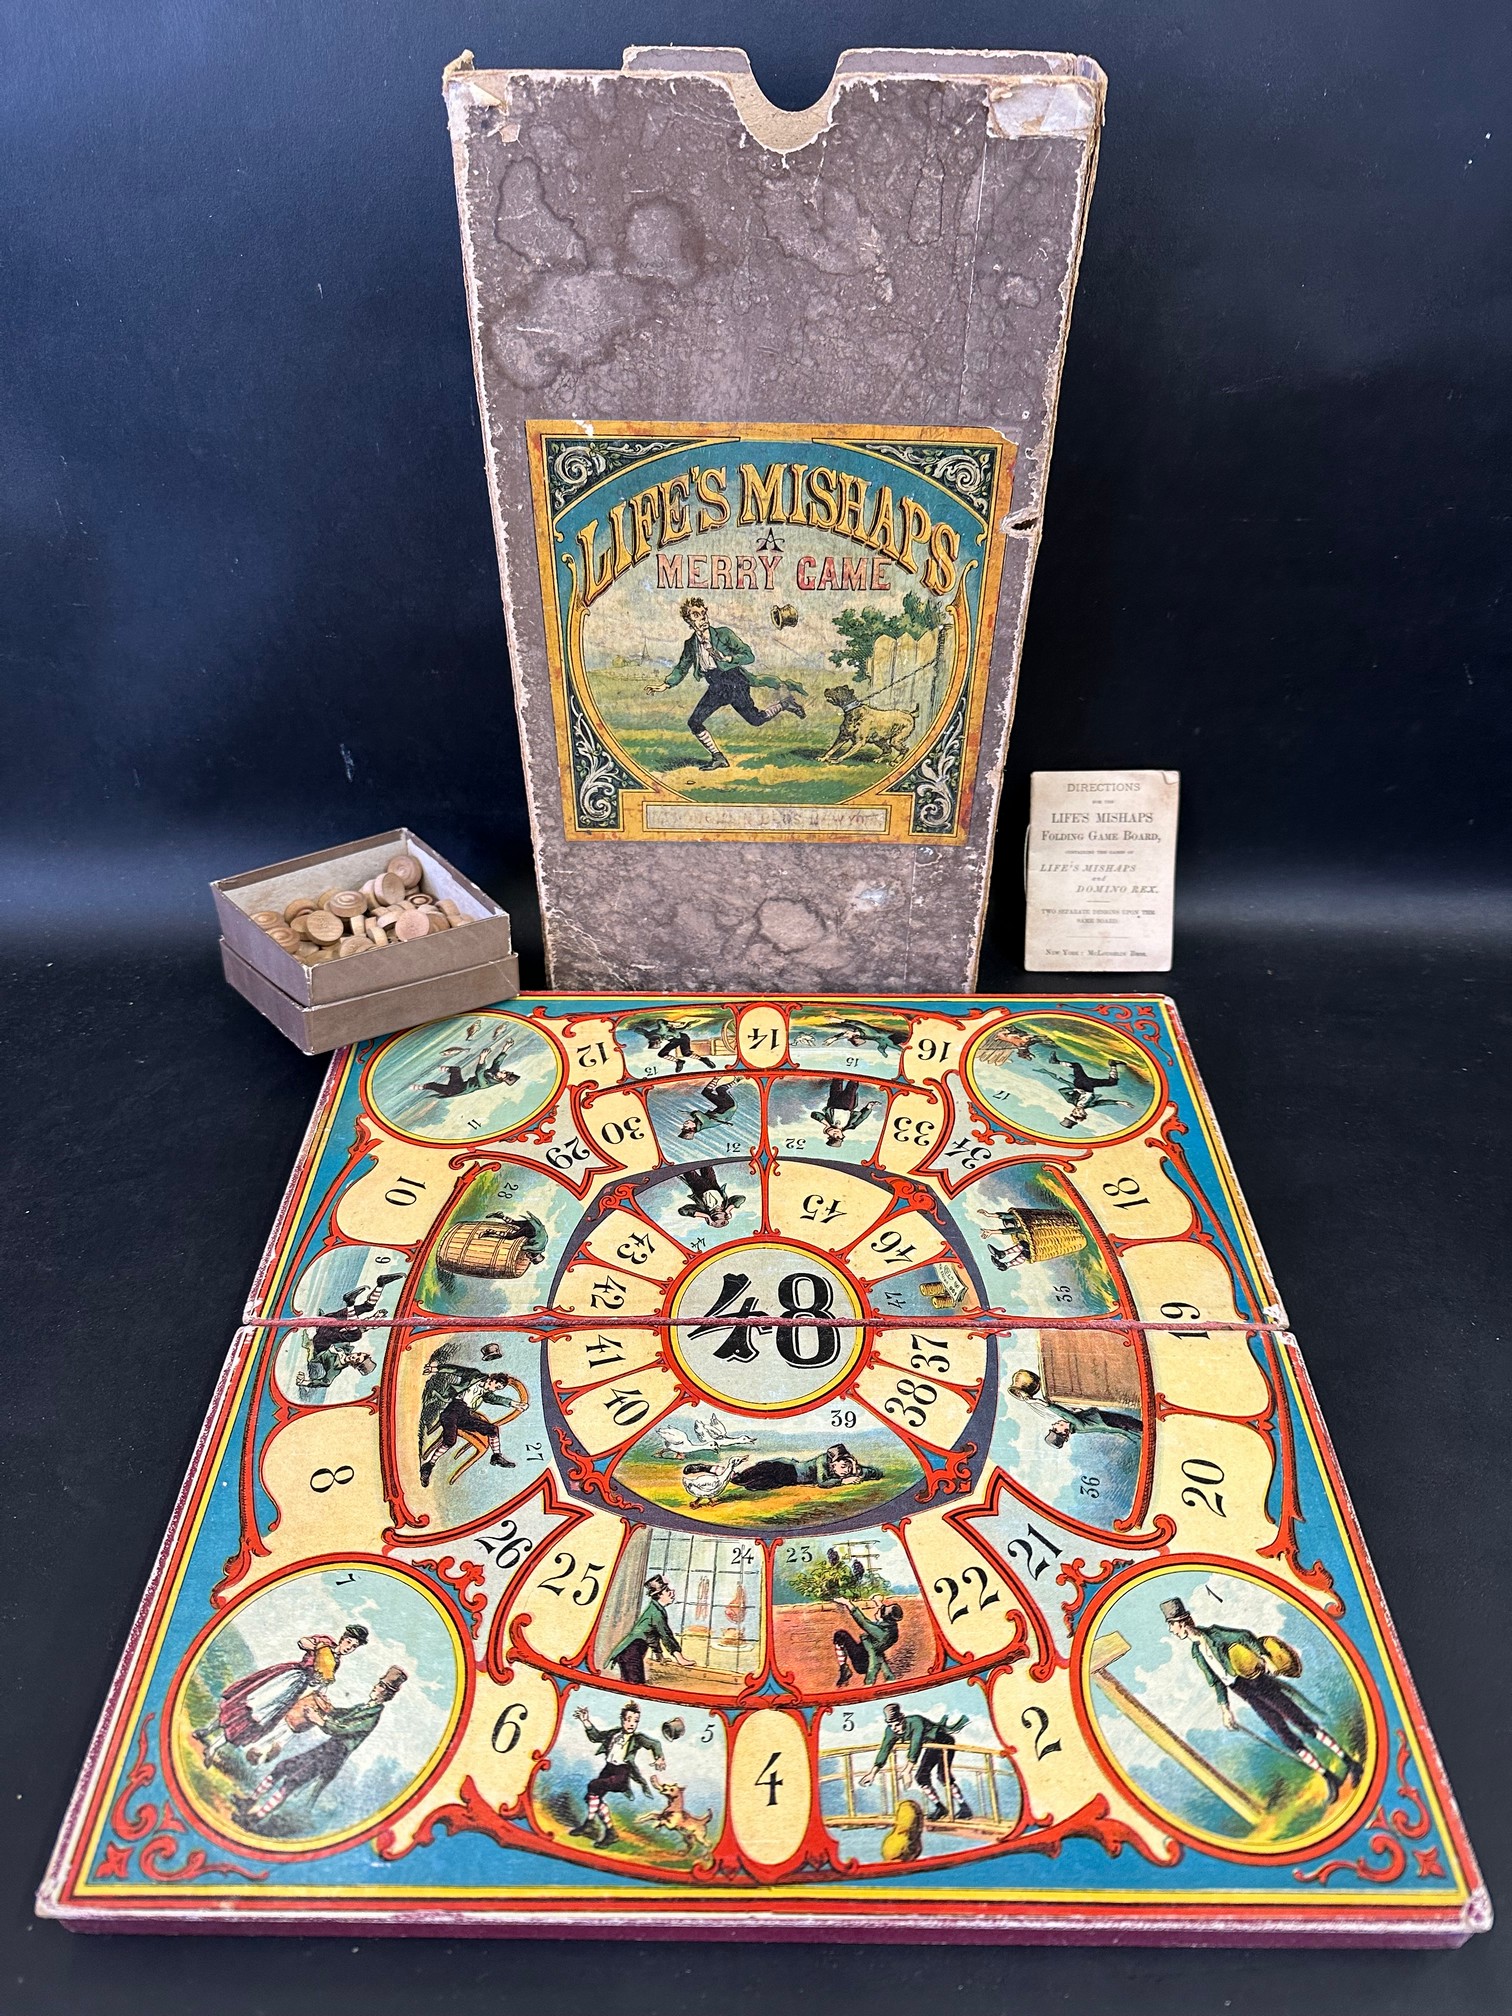 Life's Mishaps - A Merry Game by McLoughlin, folding game board in original slip case, with original